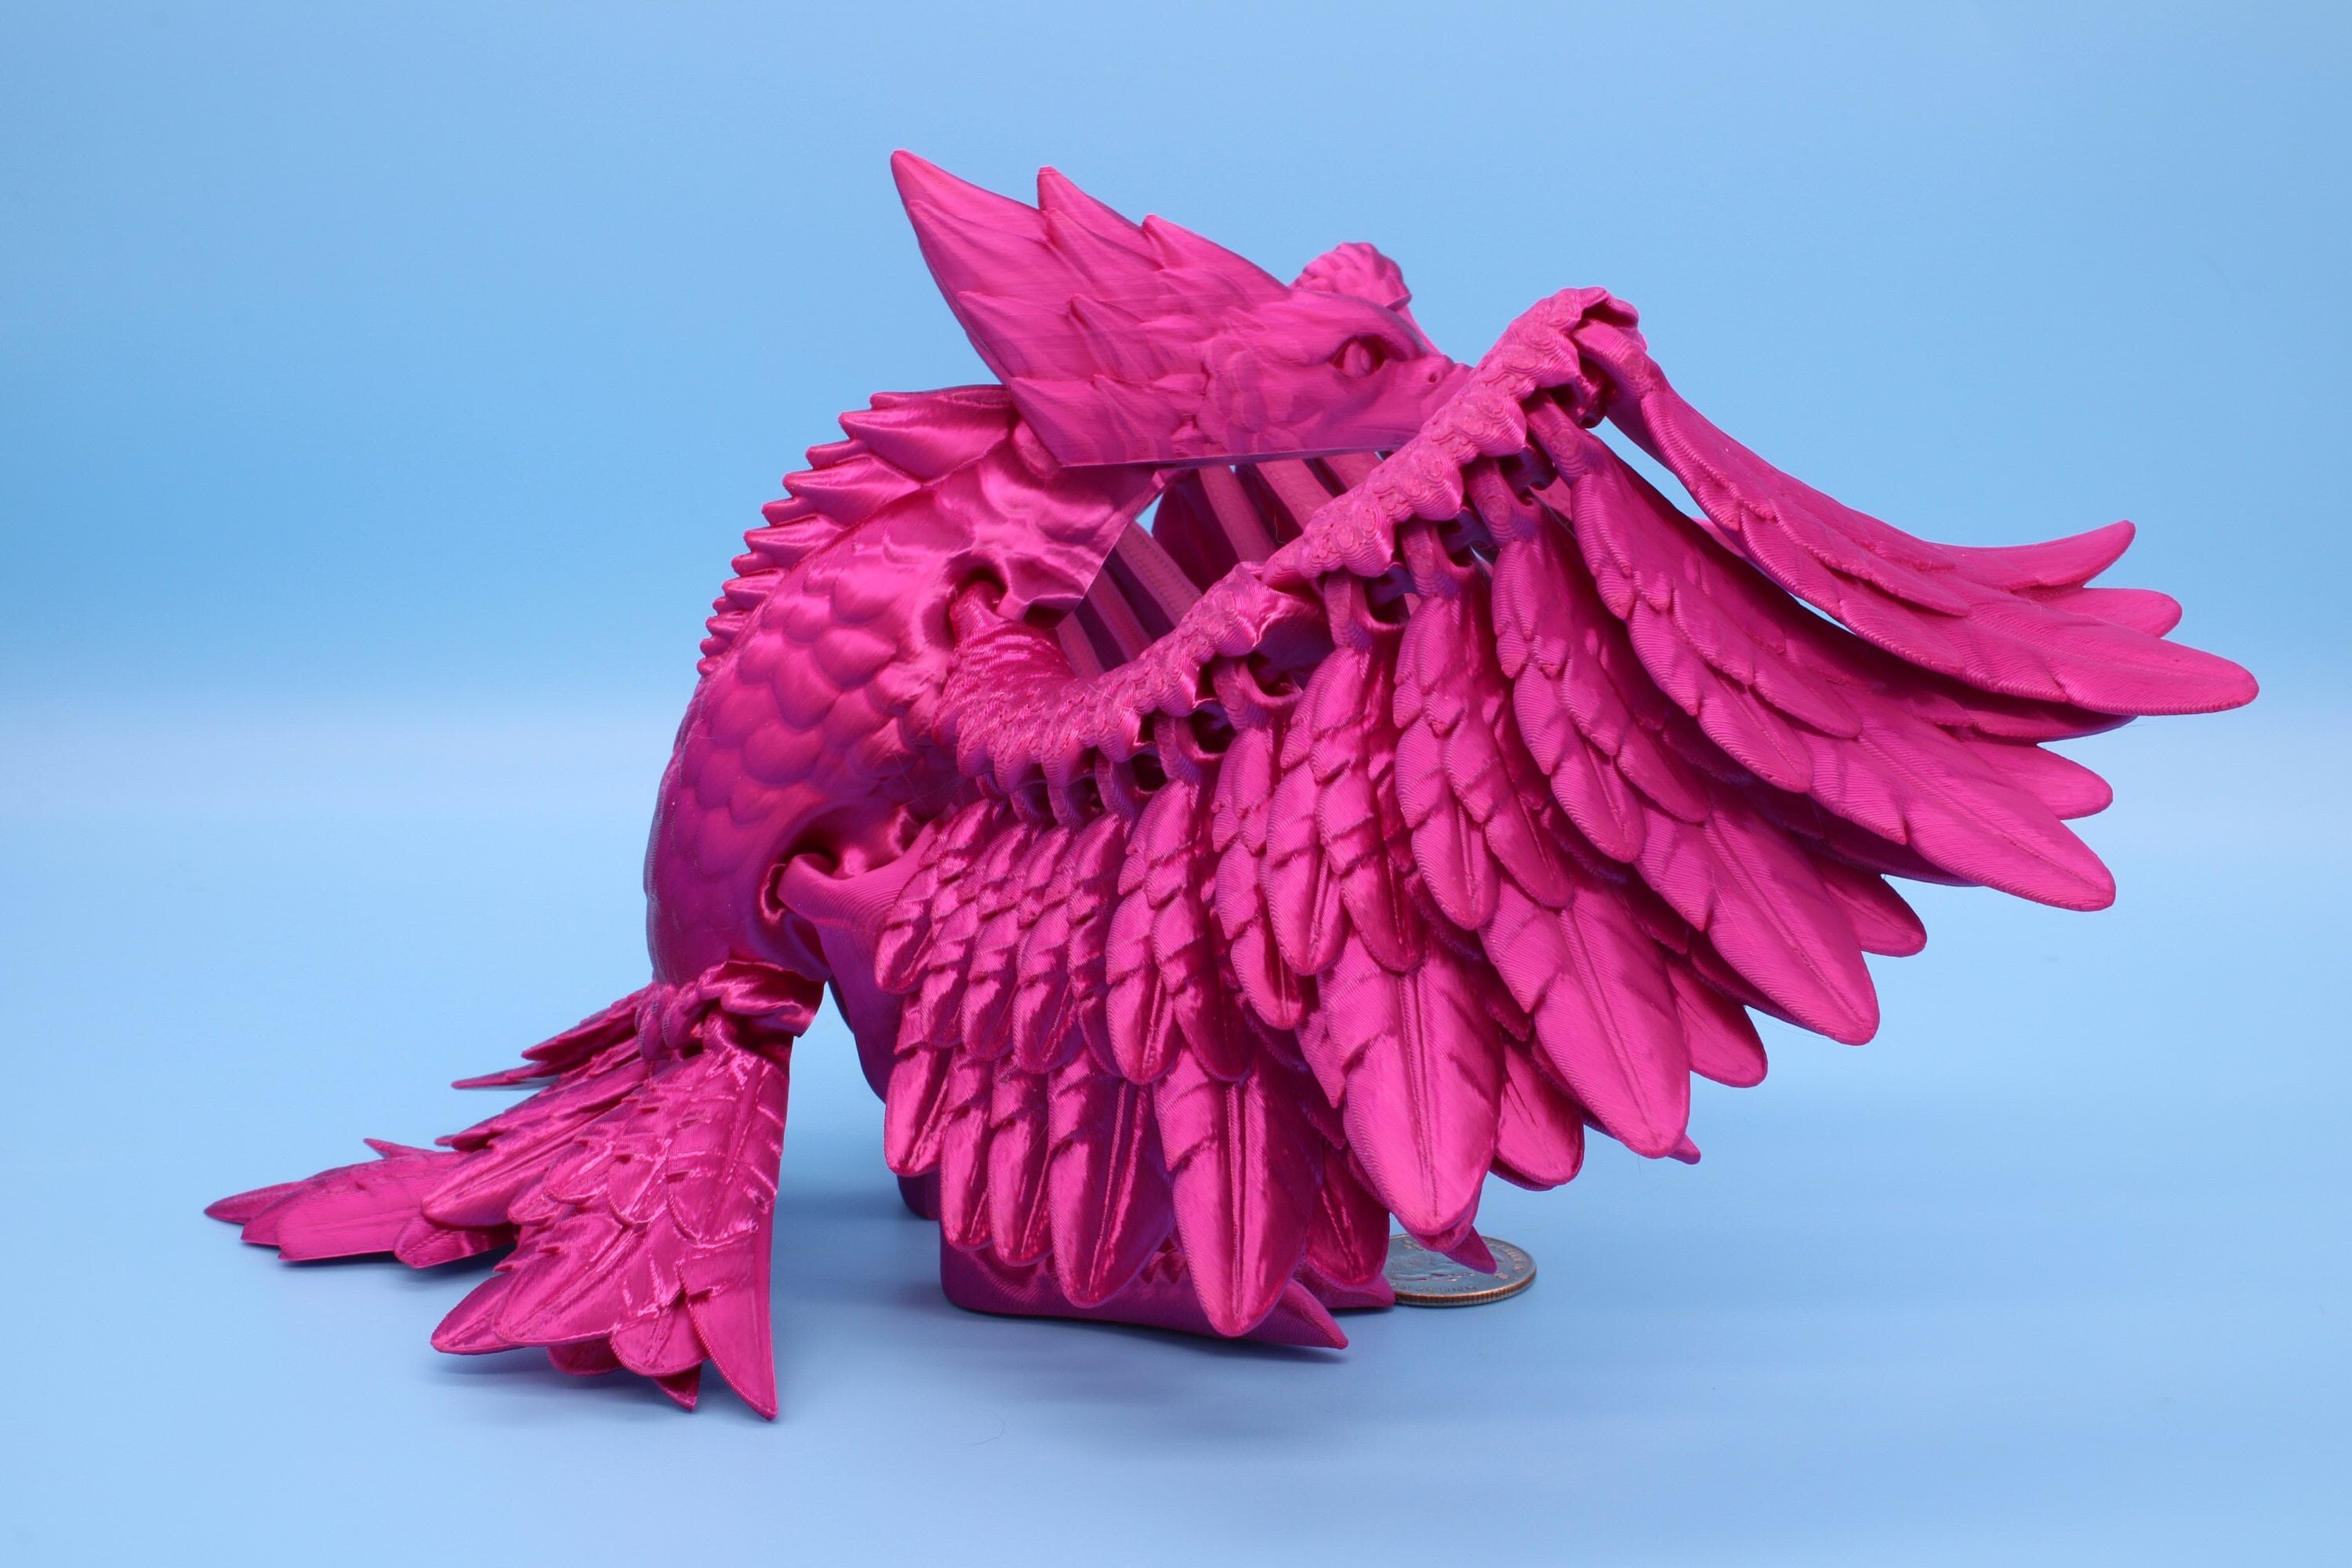 XL Phoenix Pink | Cute Flexi | Unique 3D printed. | Great Articulating fidget toy, desk, sensory toy | 5.5 inch tall | 10 in wing span.